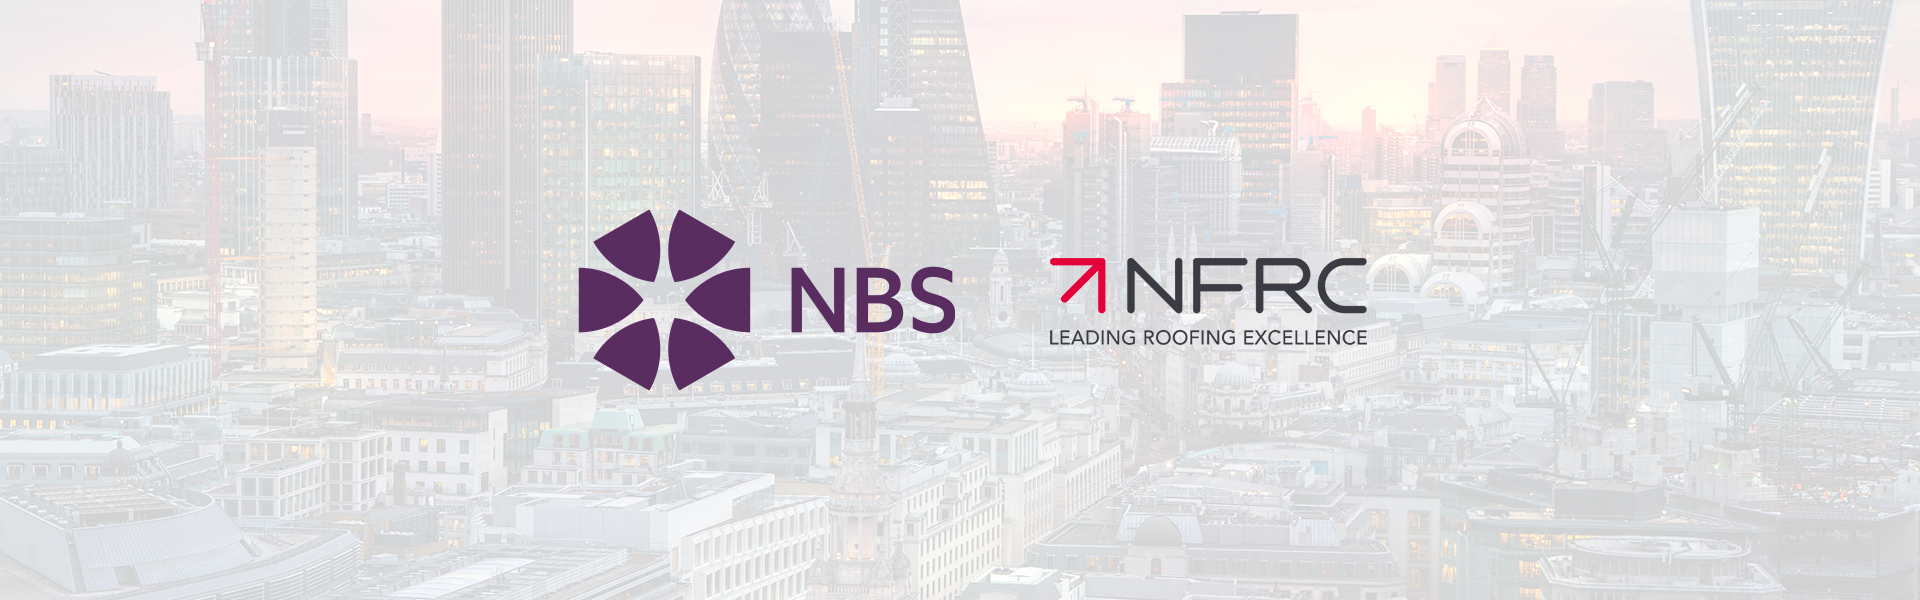 NBS and NFRC announce strategic partnership for industry best practice @theNBS @TheNFRC